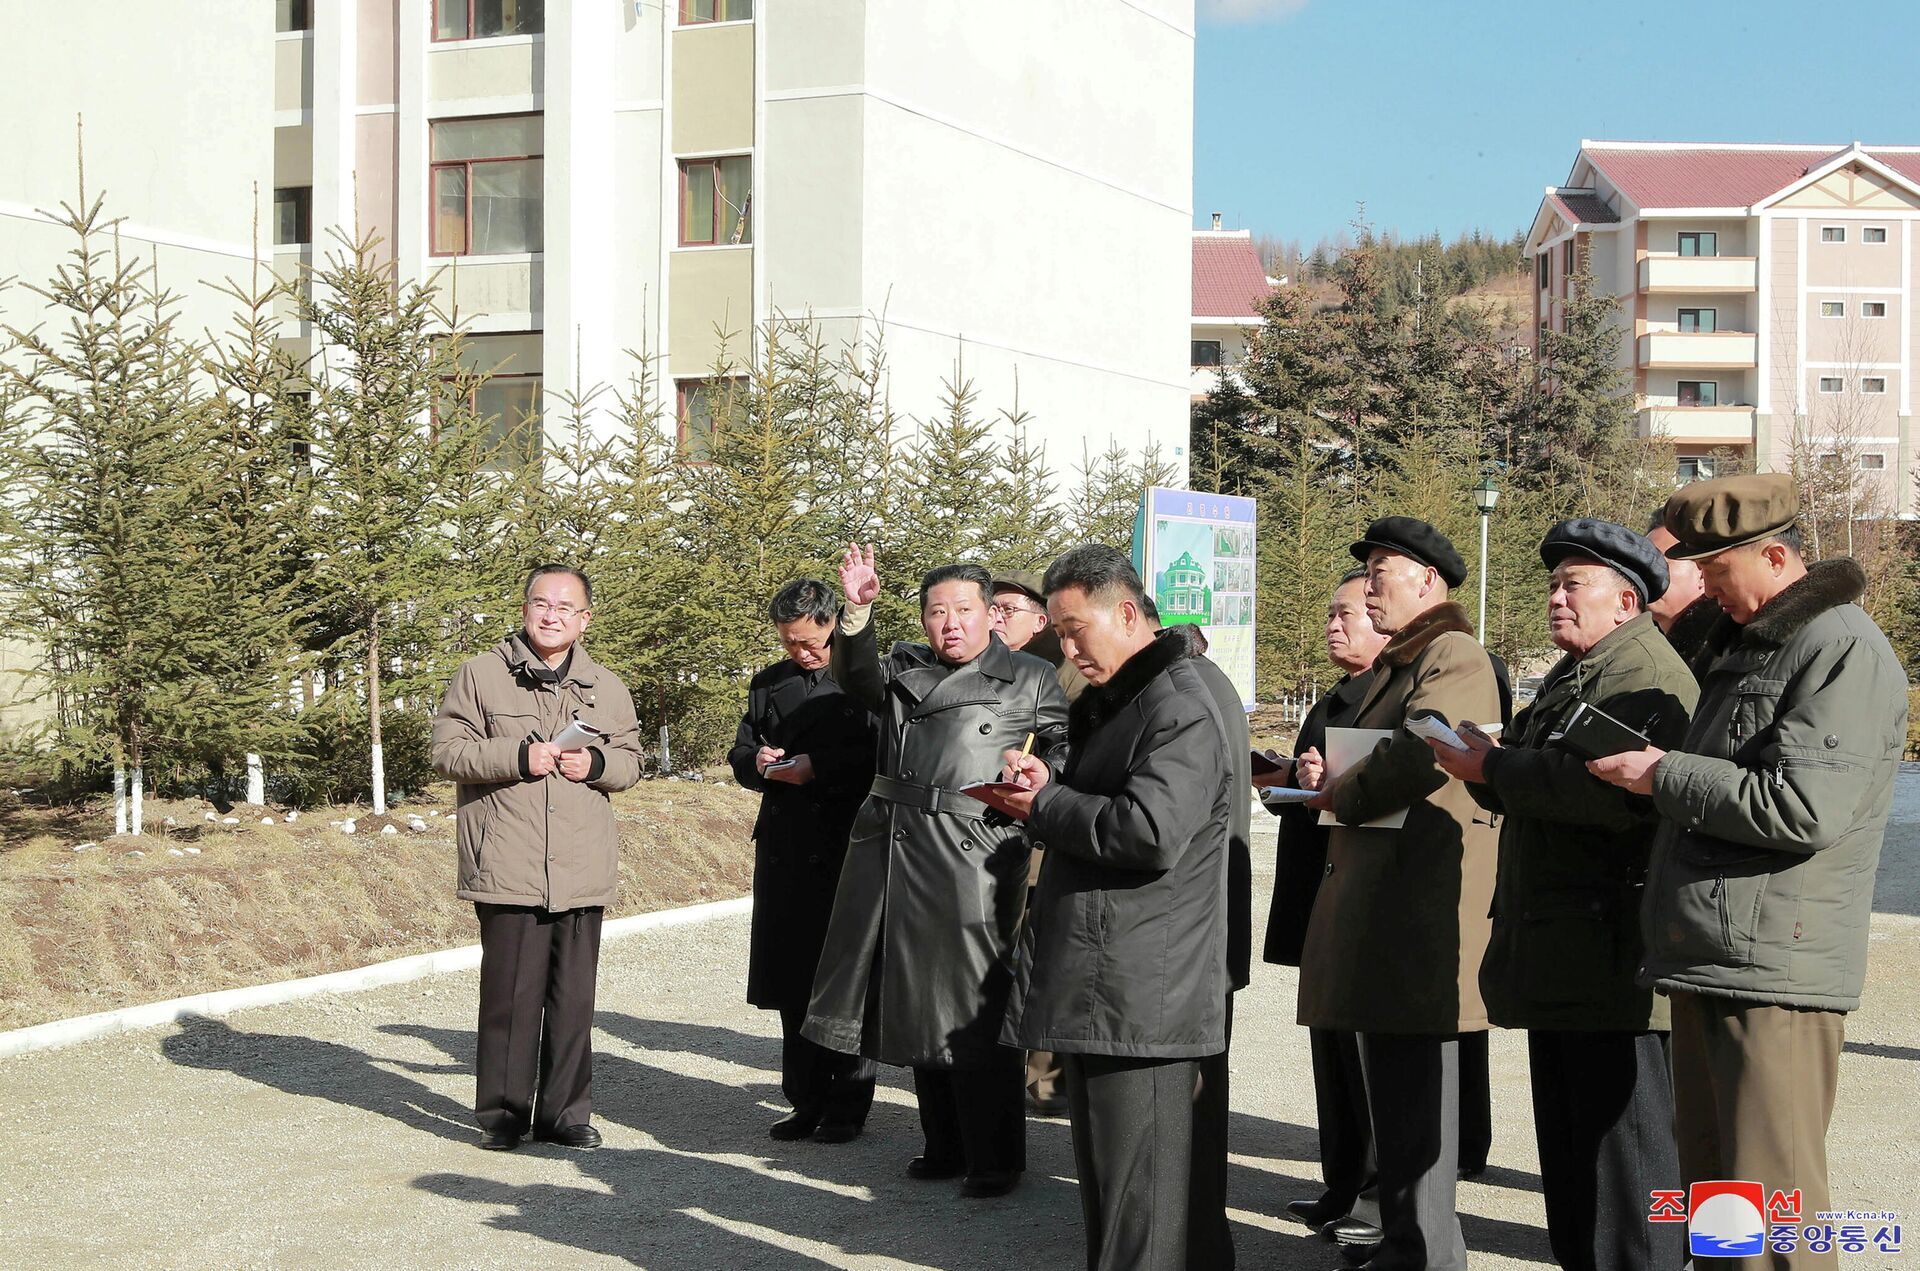 North Korean leader Kim Jong Un gives field guidance during a visit to Samjiyon City, North Korea in this undated photo released on November 16, 2021 by North Korea's Korean Central News Agency (KCNA). - Sputnik International, 1920, 16.11.2021